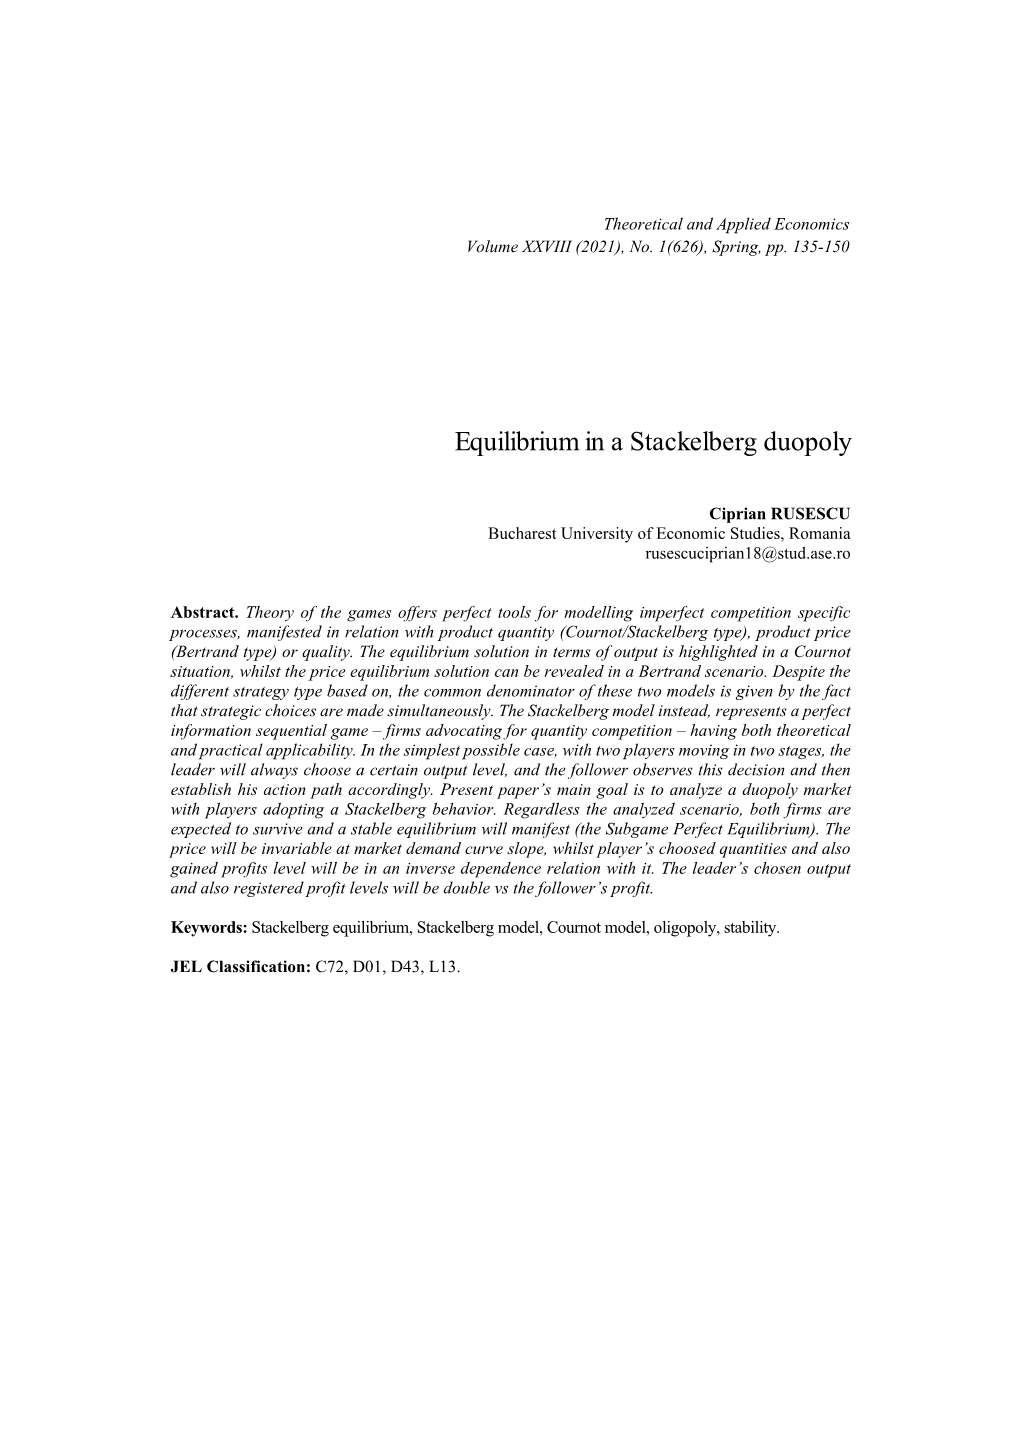 Equilibrium in a Stackelberg Duopoly